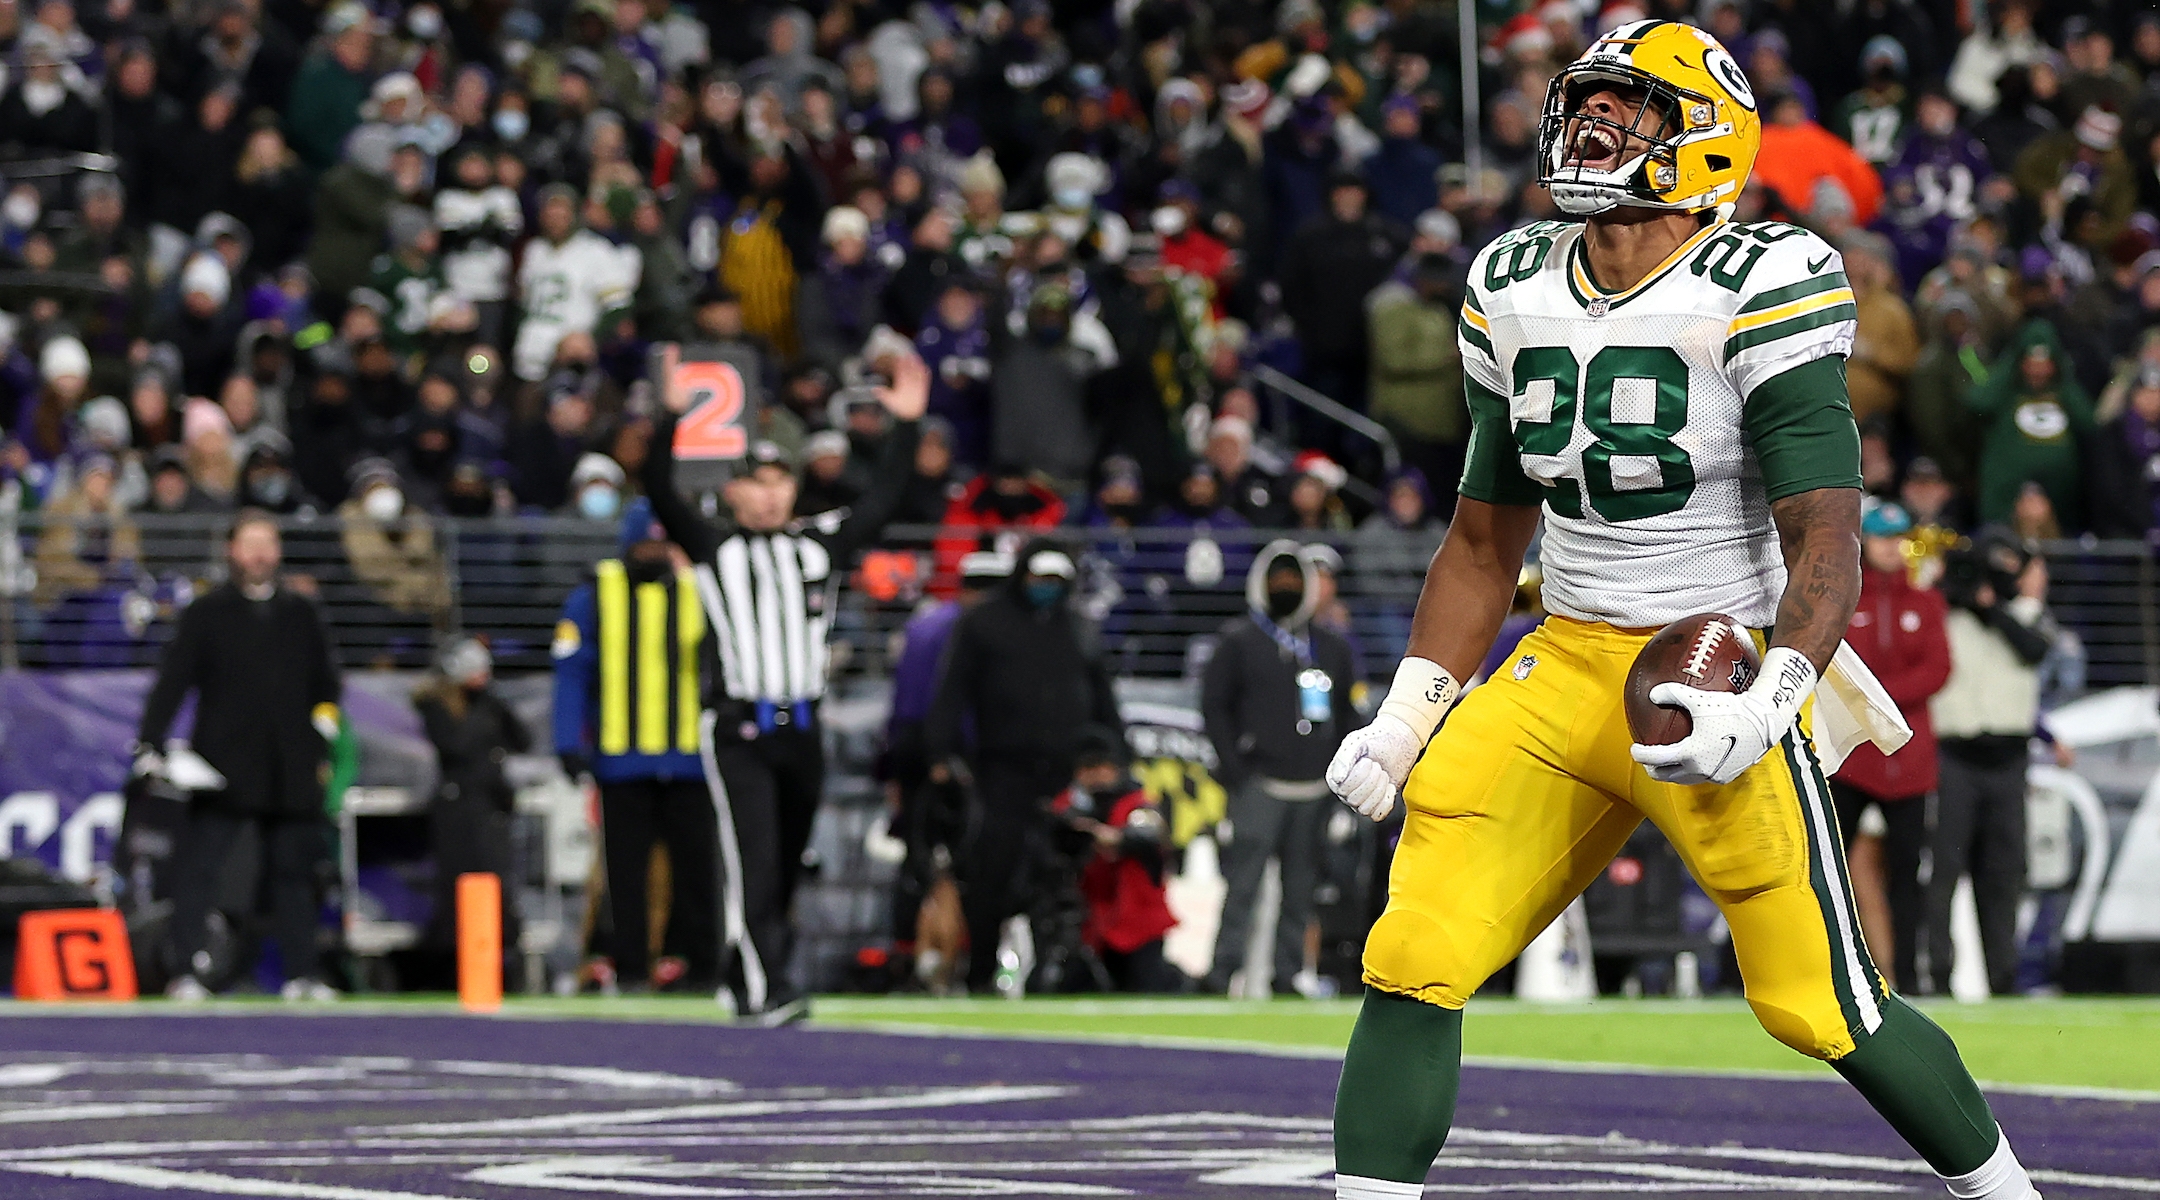 Running back A.J. Dillon of the Green Bay Packers celebrates after rushing for a first half touchdown against the Baltimore Ravens at M&T Bank Stadium in Baltimore, Dec. 19, 2021. (Rob Carr/Getty Images)